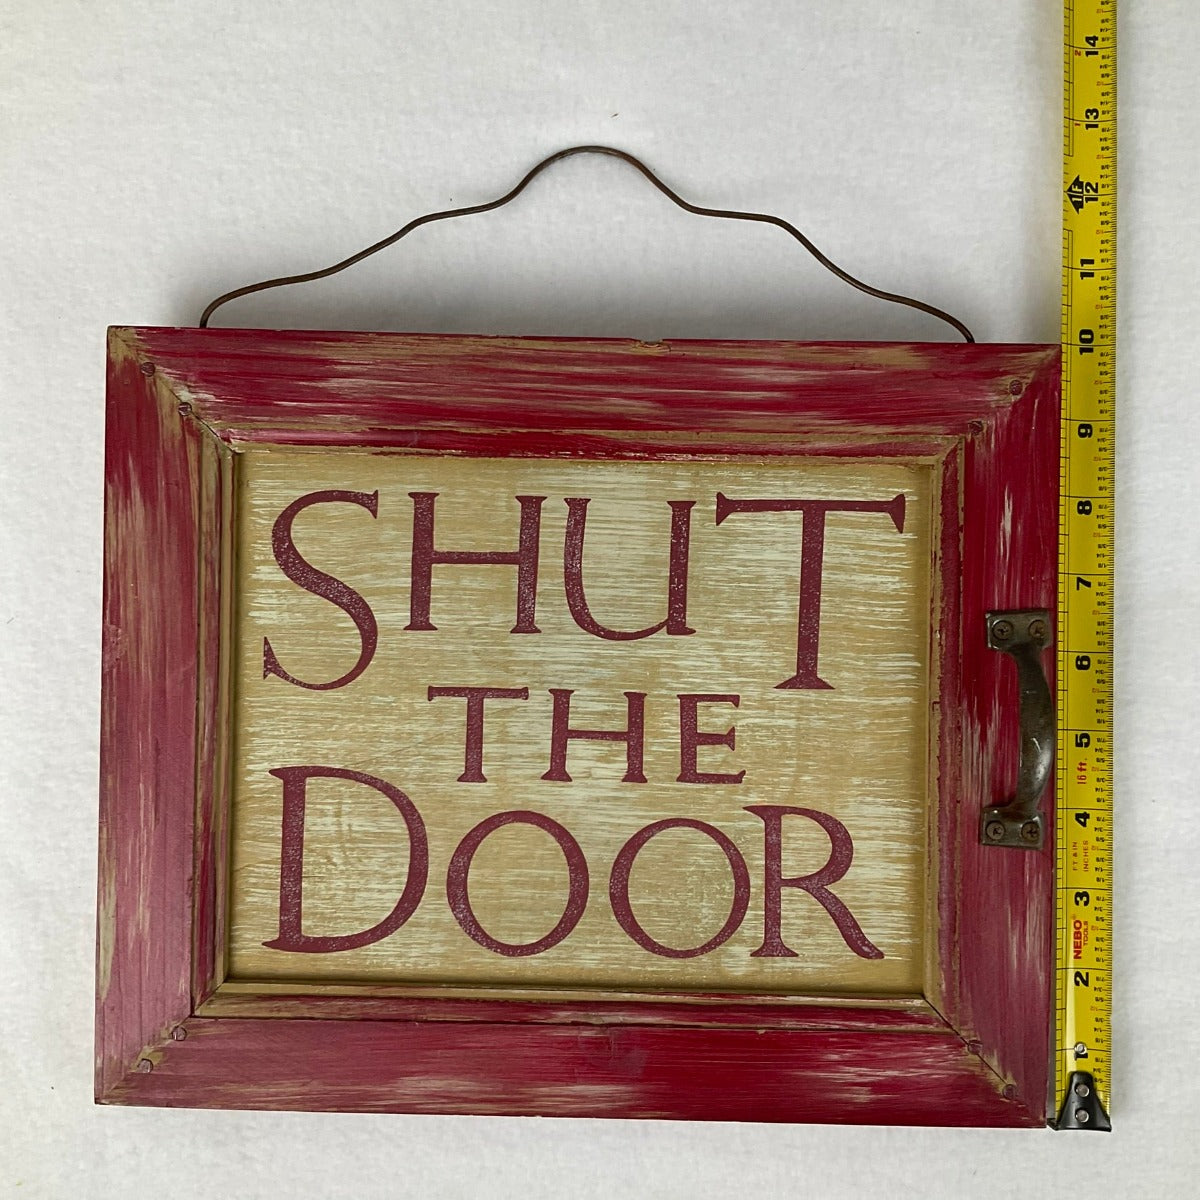 SHUT THE DOOR Wooden Sign with Vintage Look - 10 inches High